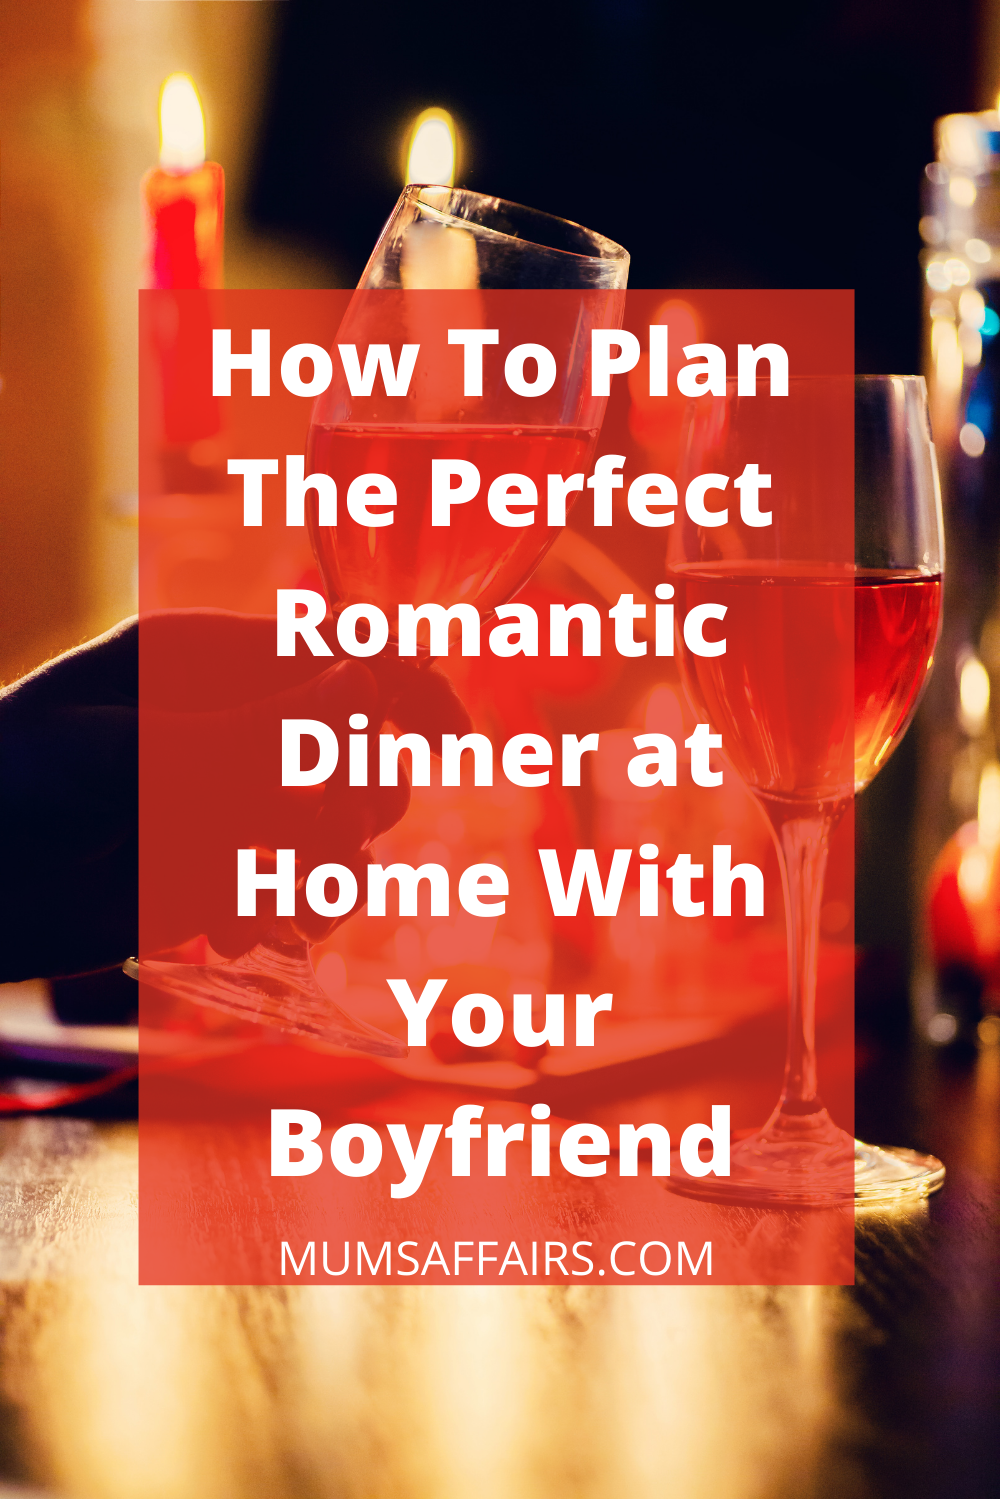  The Perfect Romantic Dinner At Home with your boyfriend